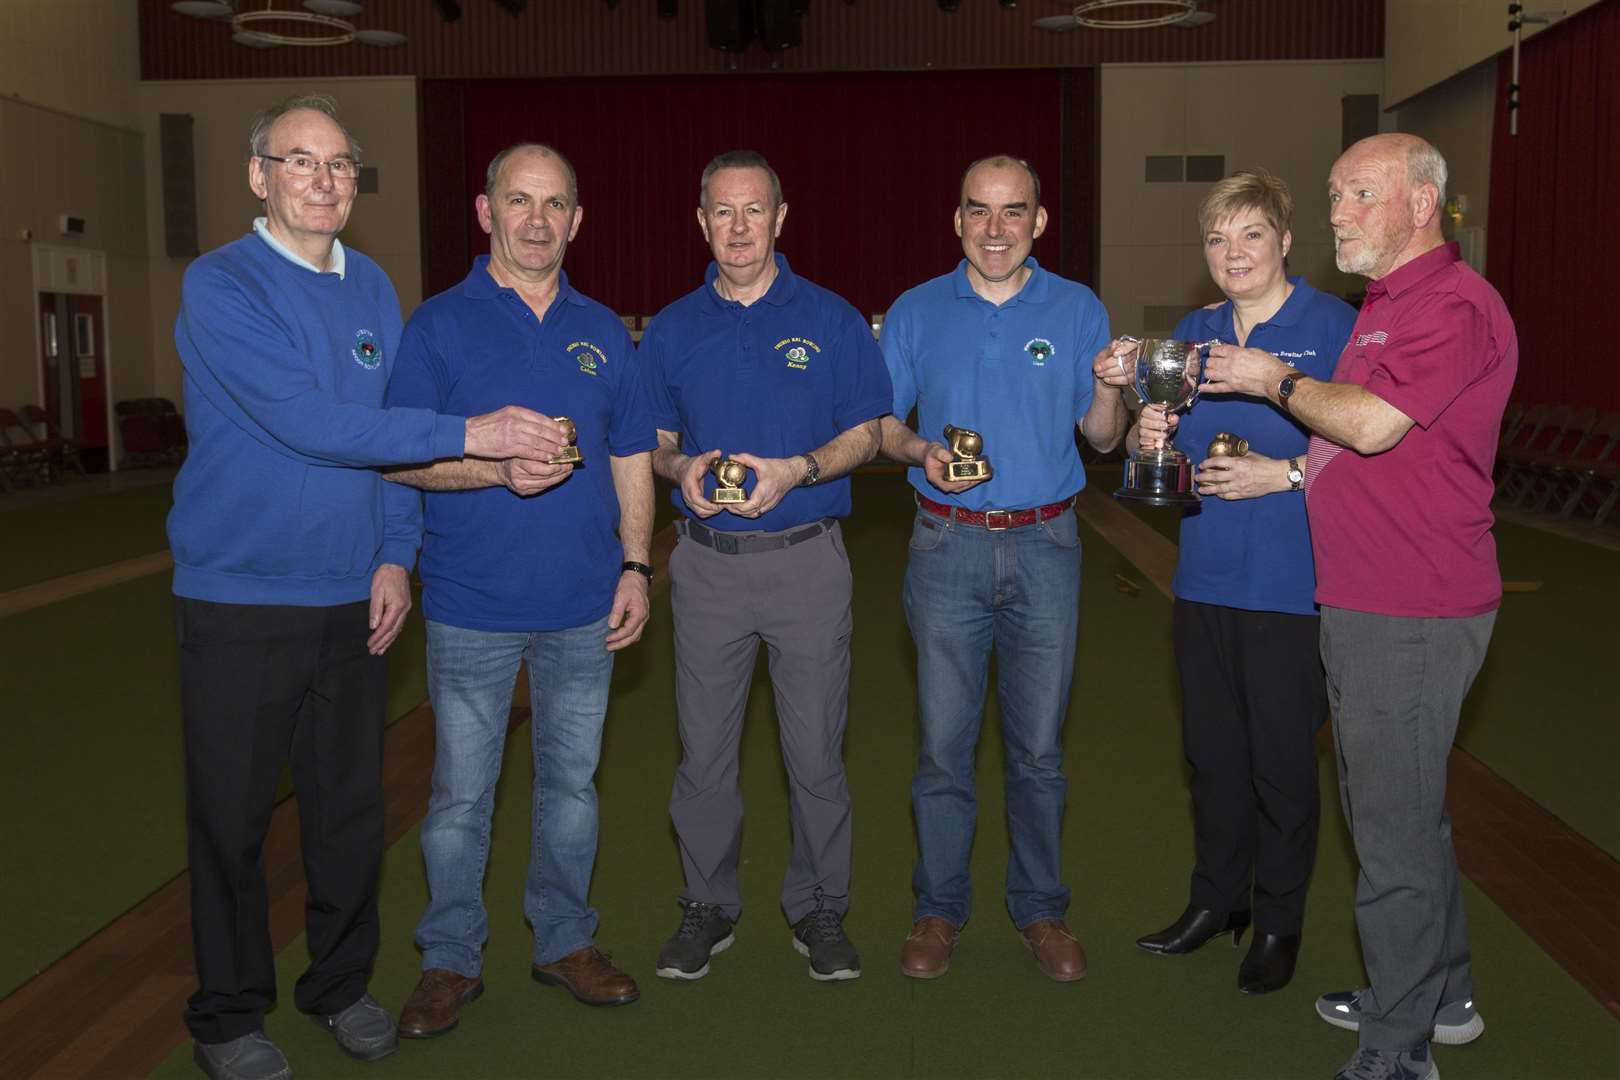 Association president David Mackay (right) is pictured presenting Liam Swanson and Linda Mackay with their trophy, while association secretary George Falconer (left) hands over the runner-up trophies to Calum Elder (second left) and Kenny McLeod. Picture: Robert MacDonald / Northern Studios